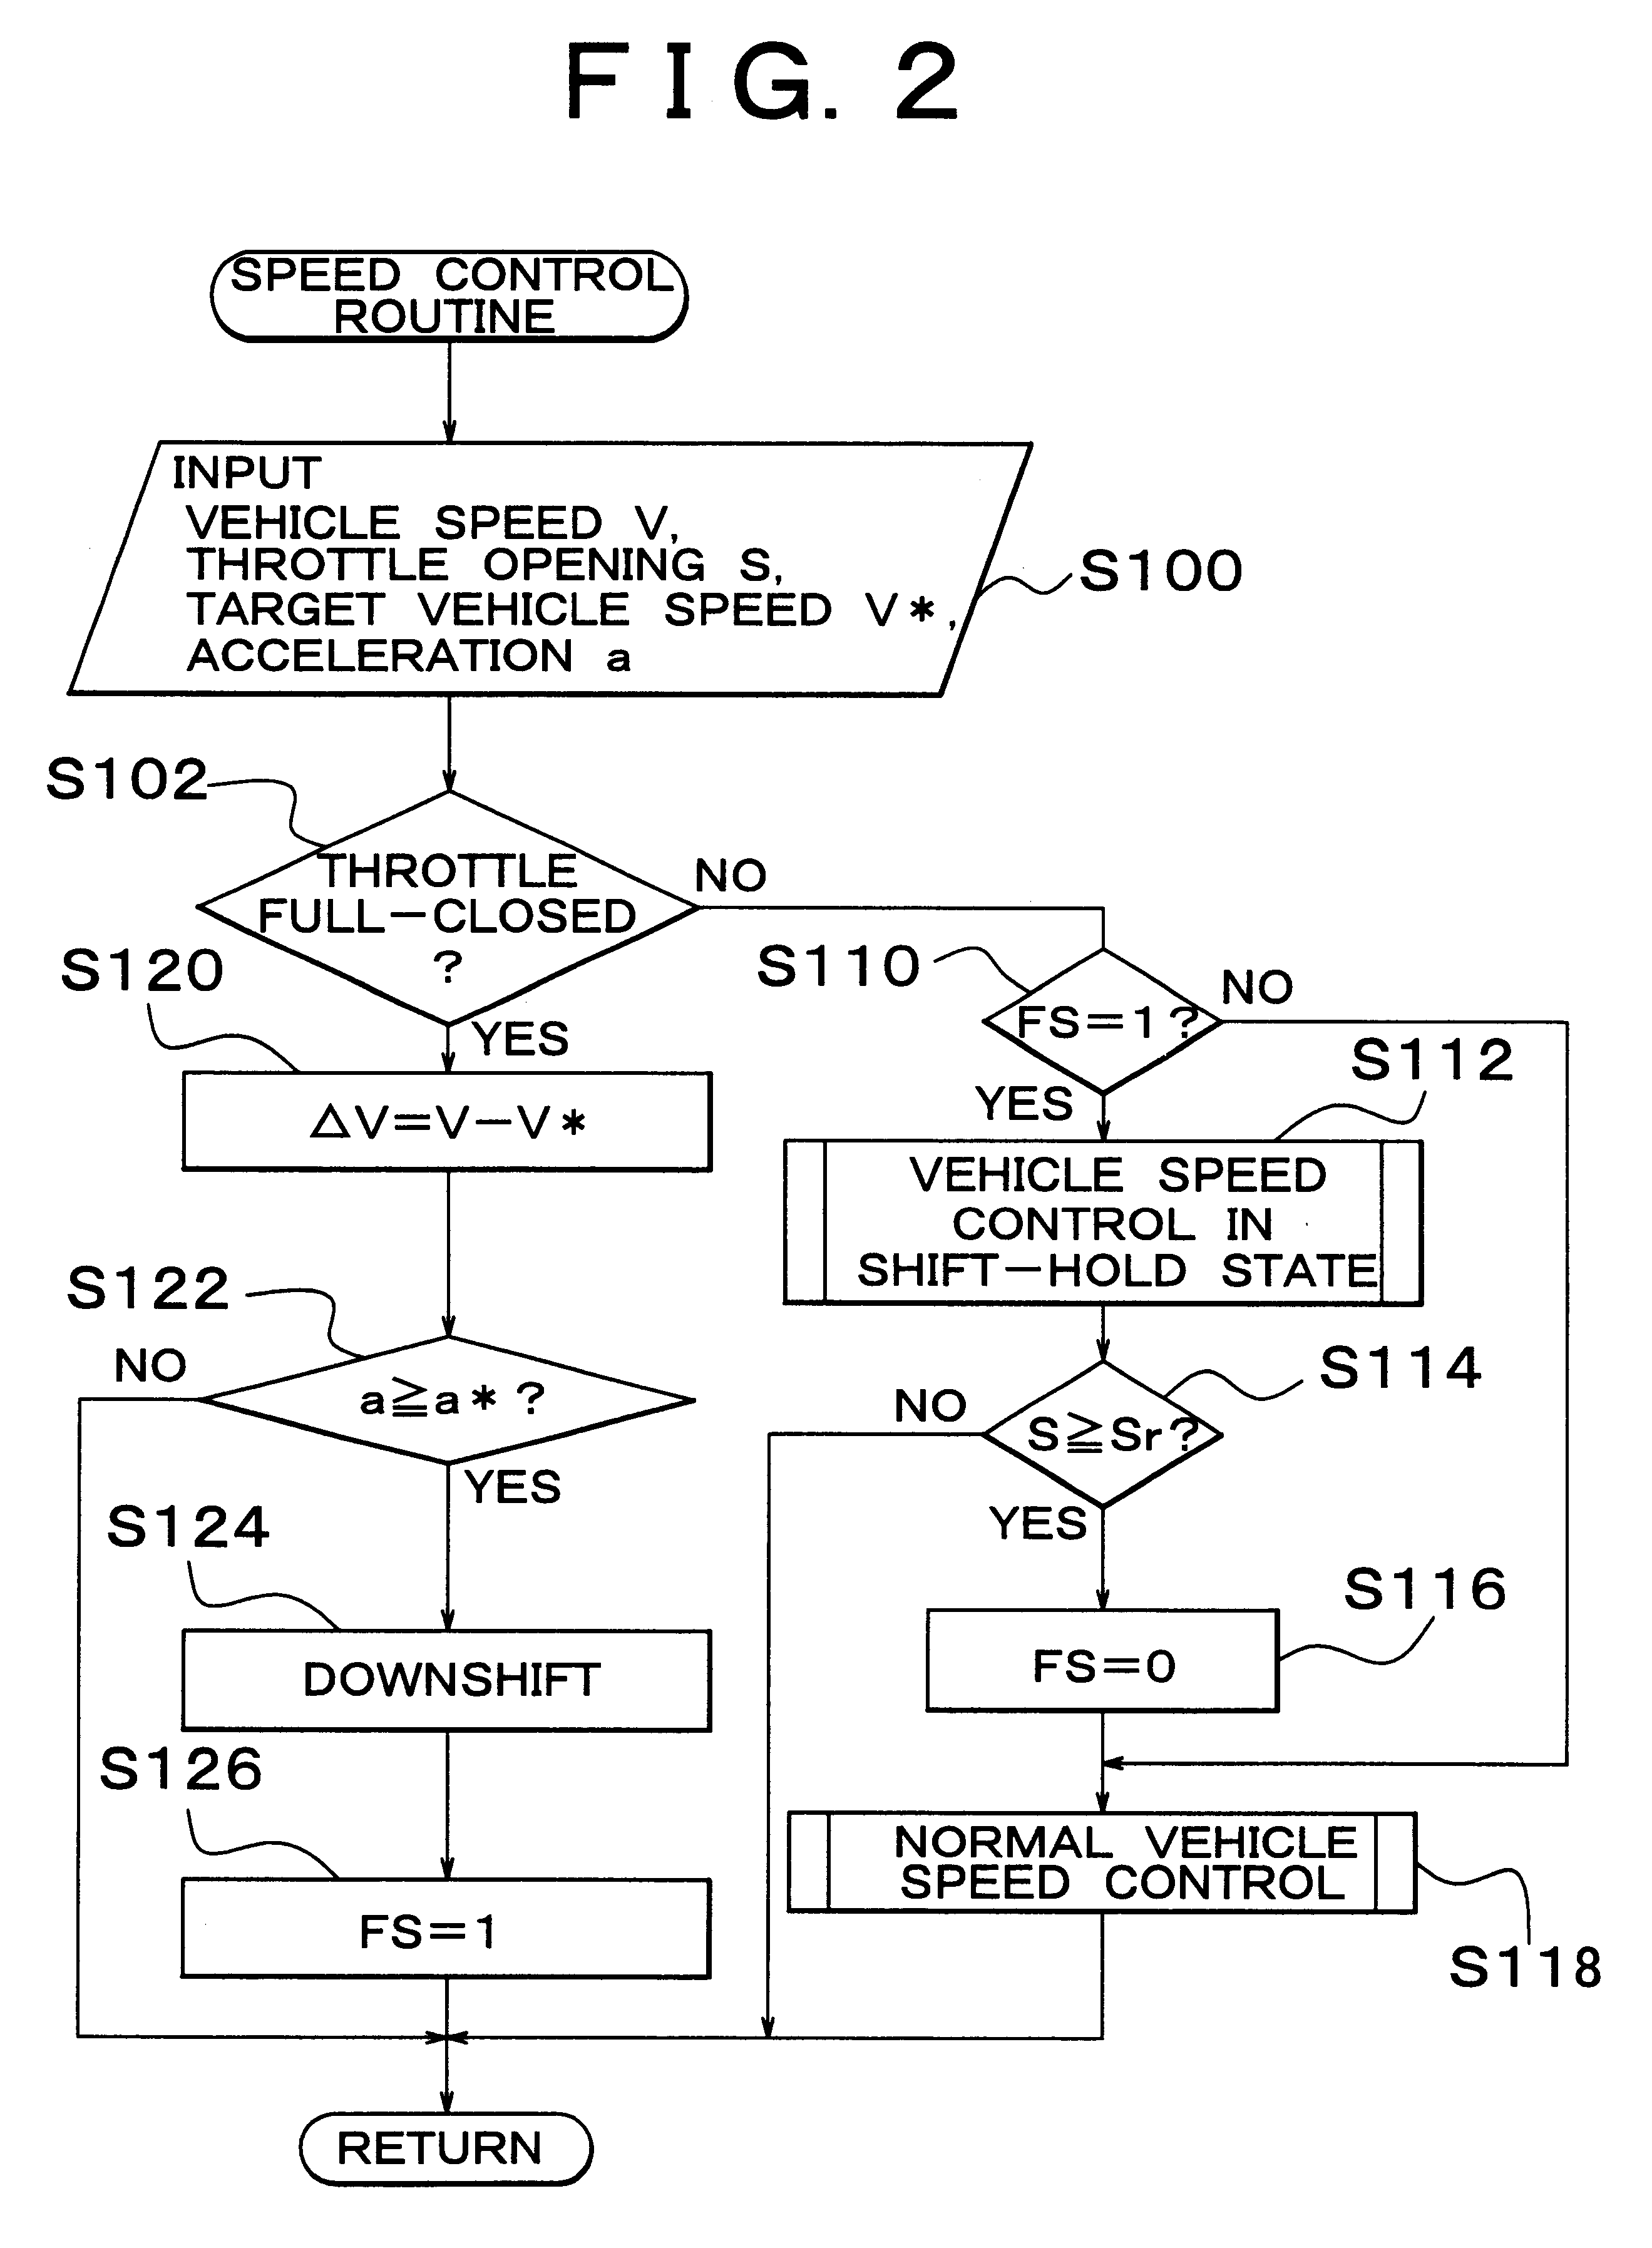 Vehicular constant-speed control apparatus and method of controlling vehicle speed